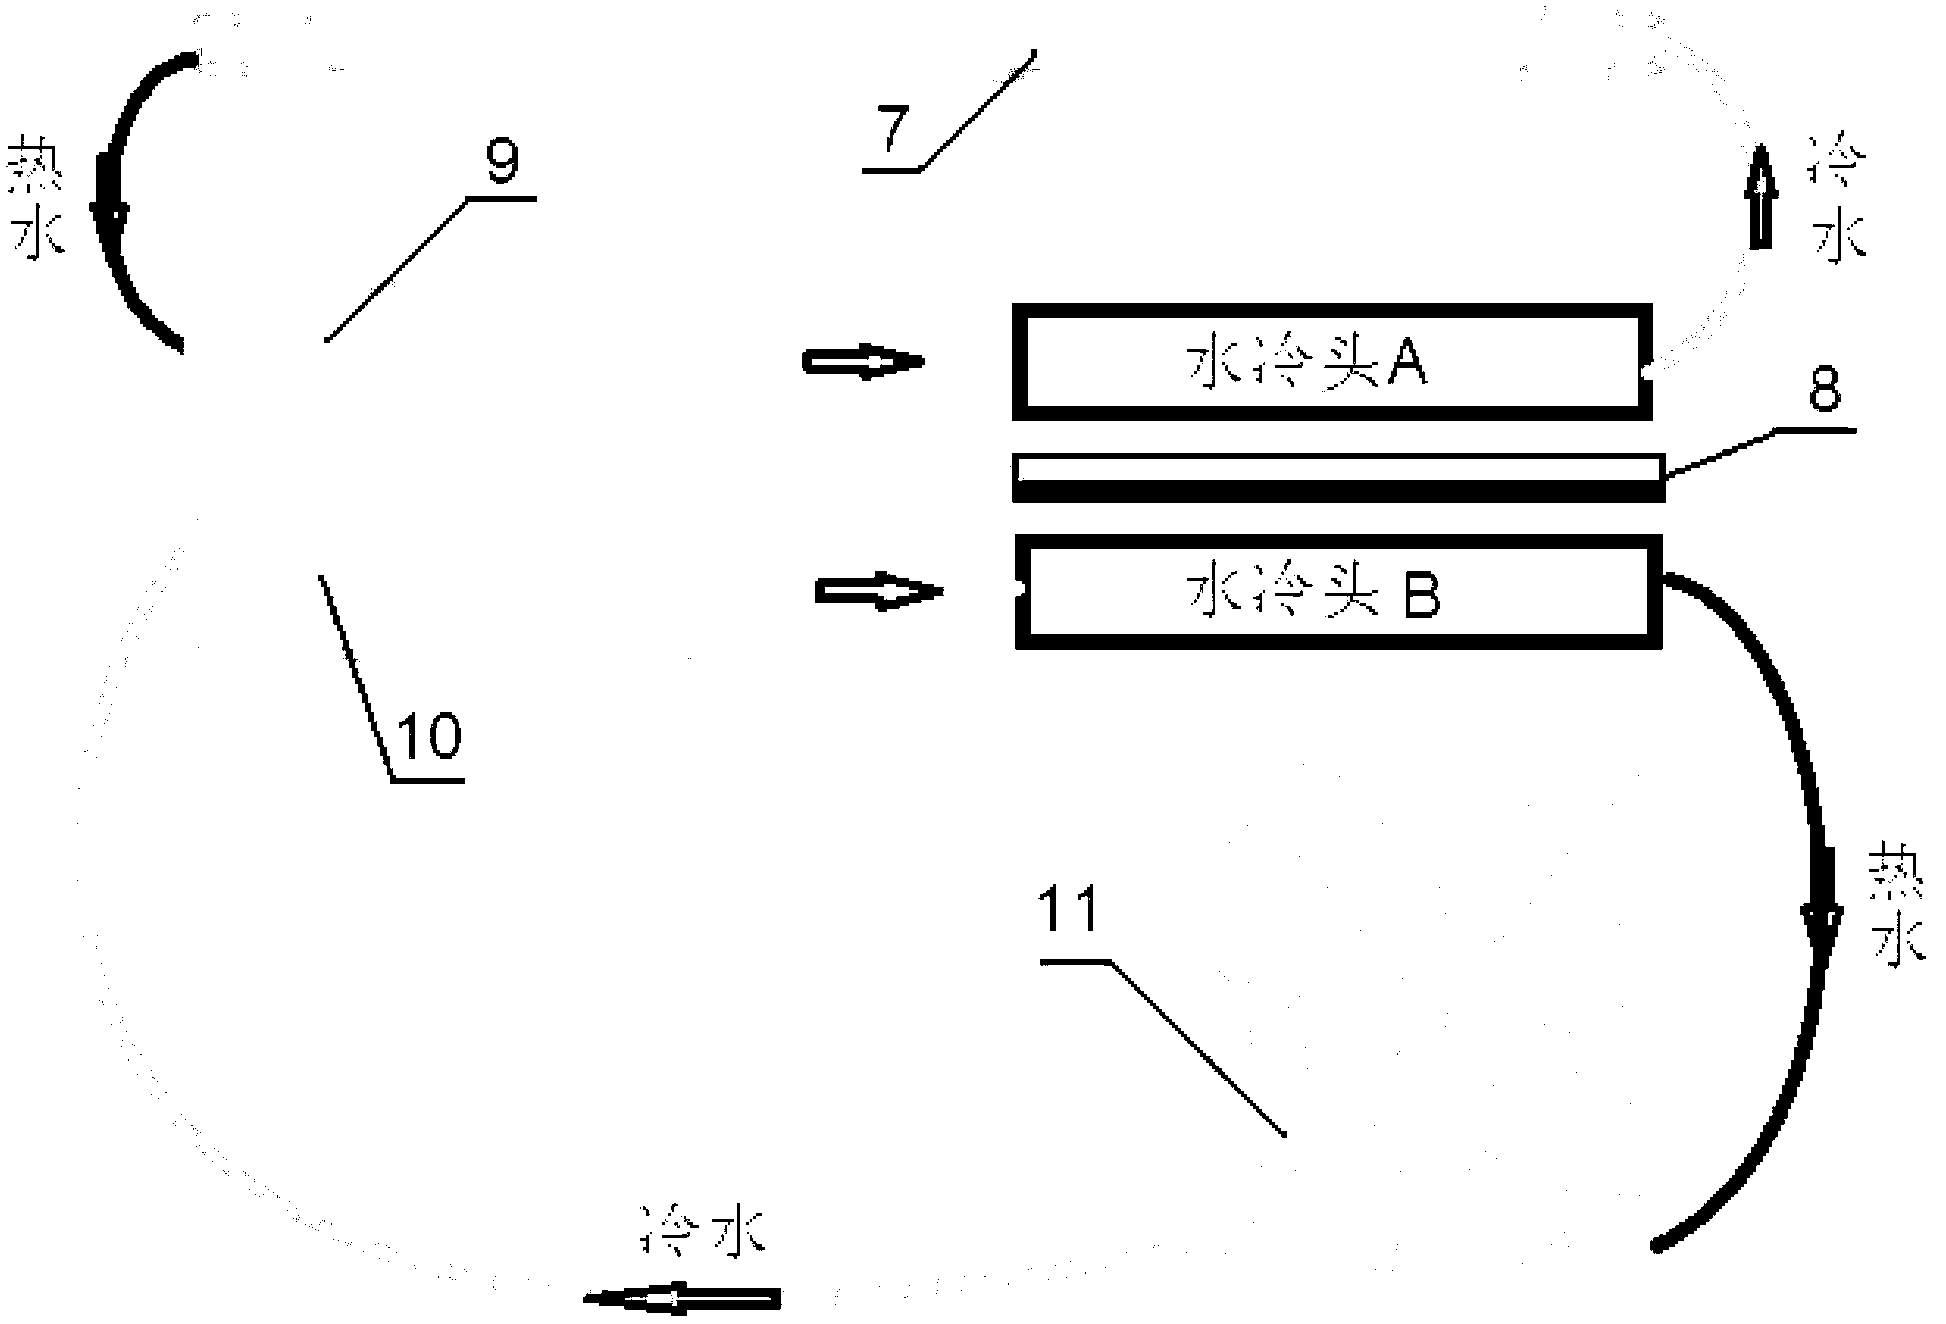 Device for measuring optical performance of material under strong laser condition